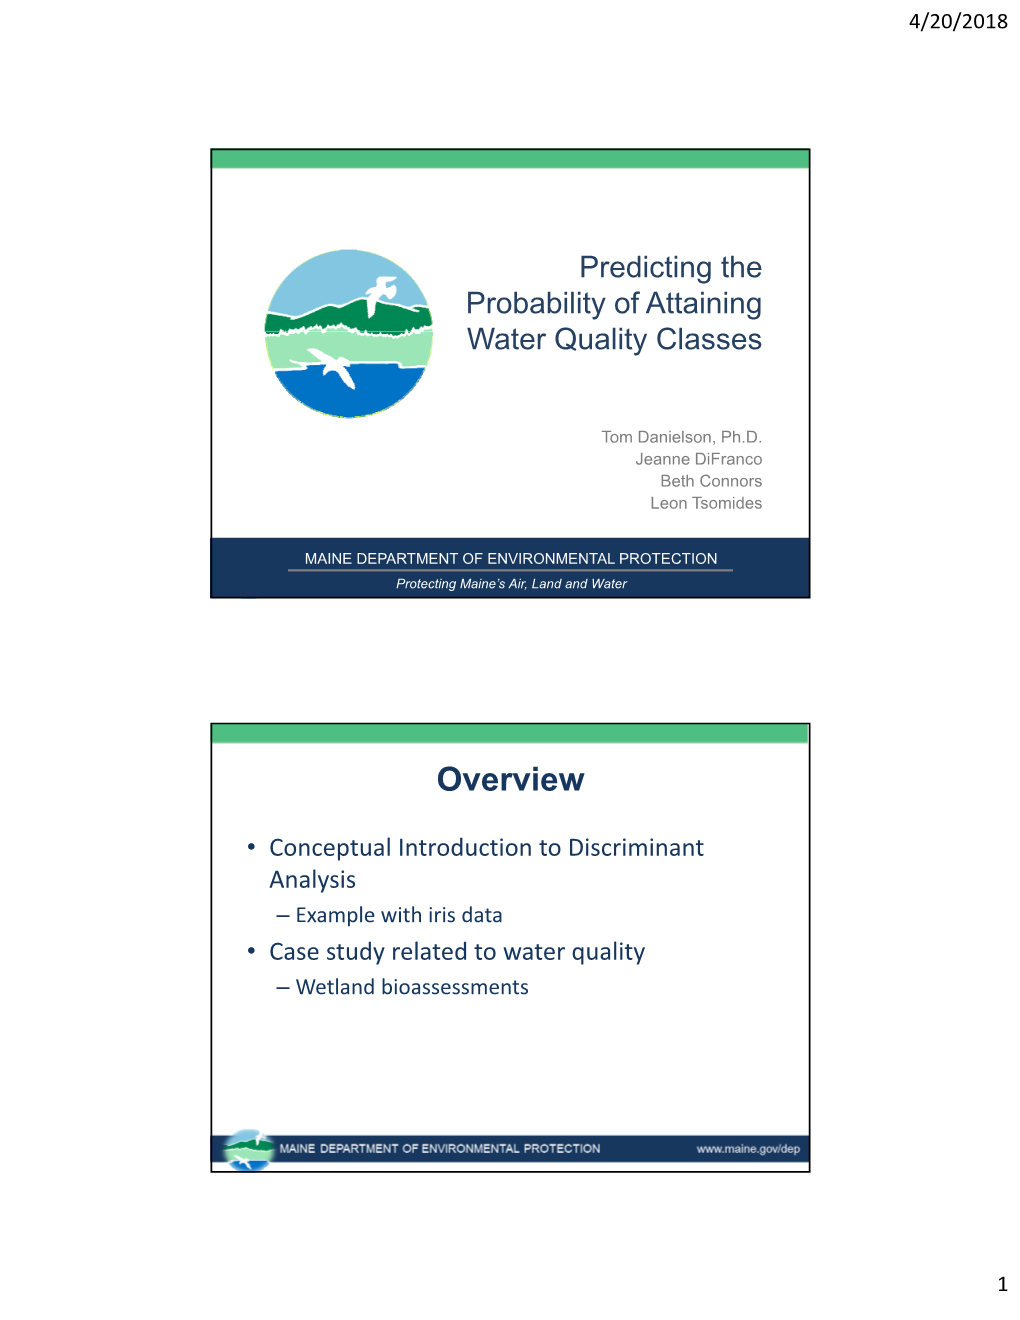 Predicting the Probability of Attaining Water Quality Classes